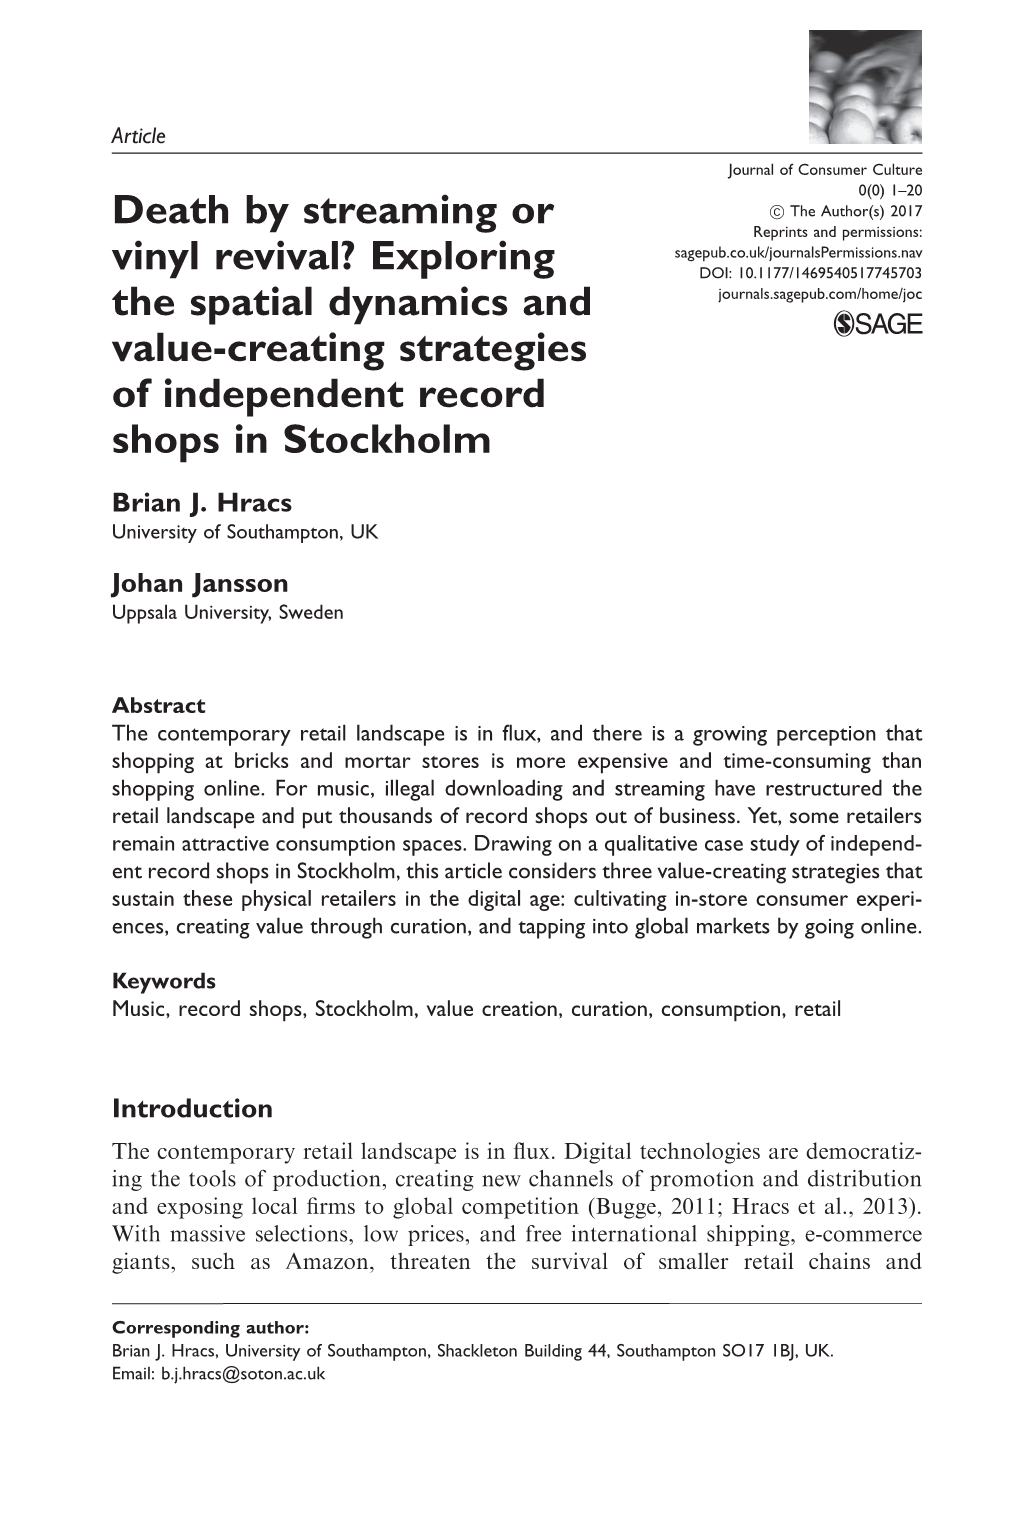 Exploring the Spatial Dynamics and Value-Creating Strategies of Independent Record Shops In